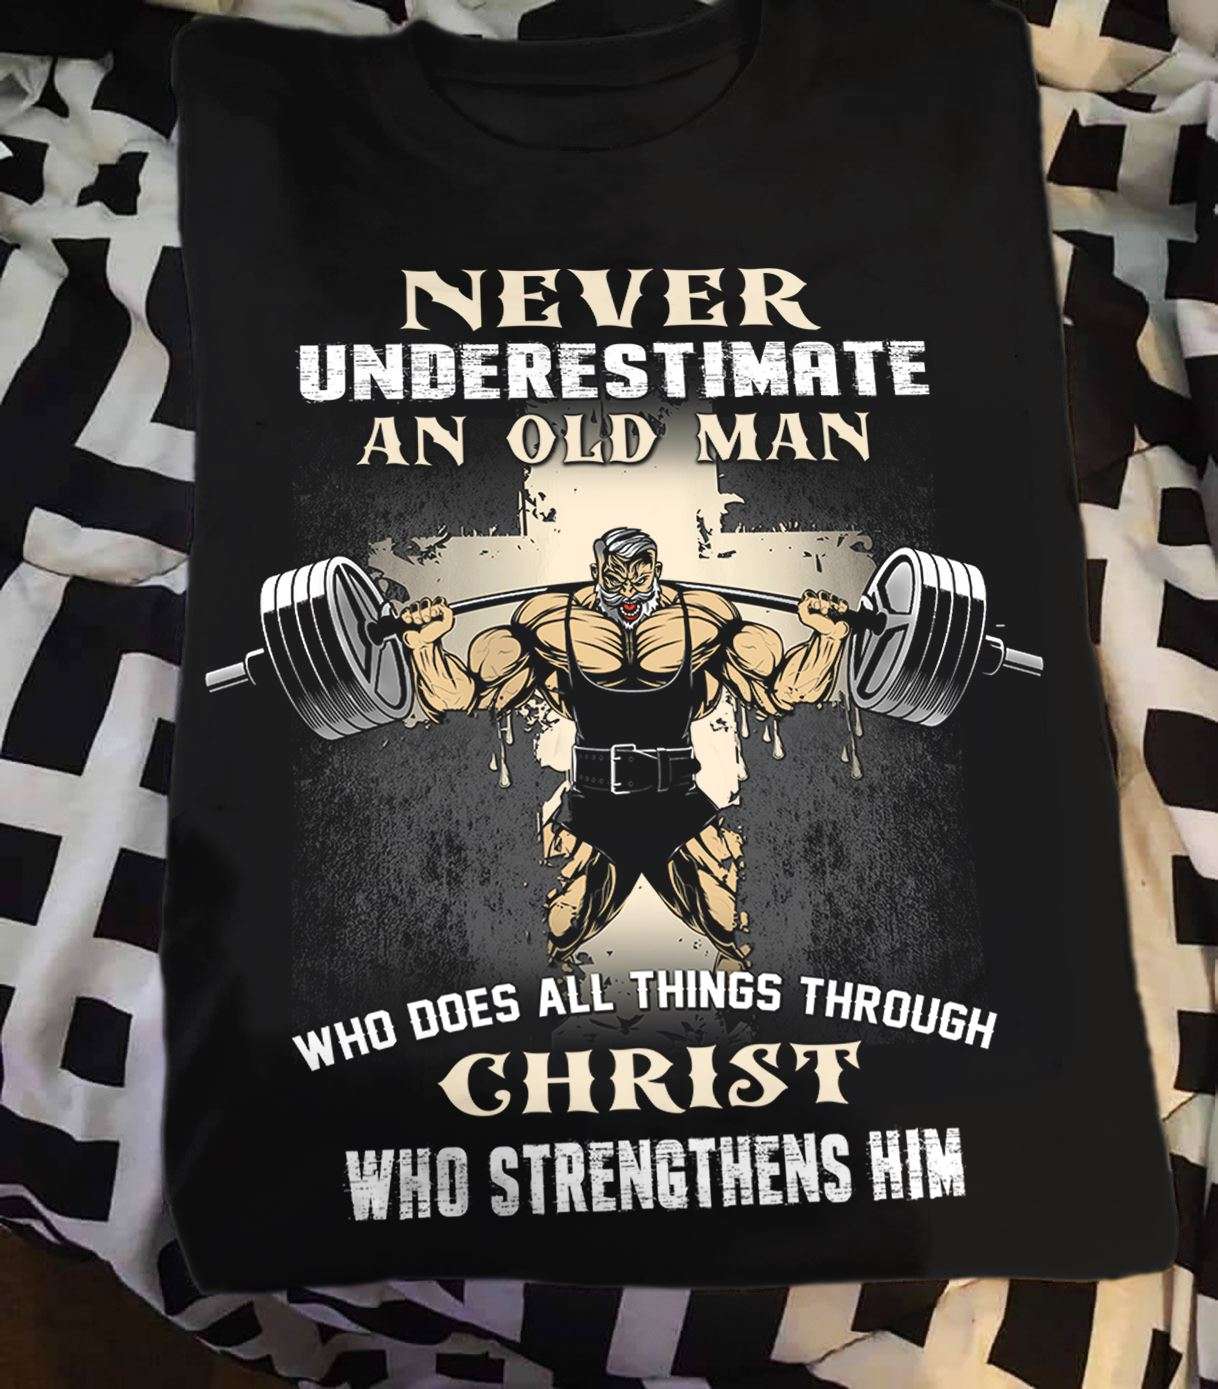 God Lifting Weights - Never underestimate an old man who does all things through christ who strengthens him